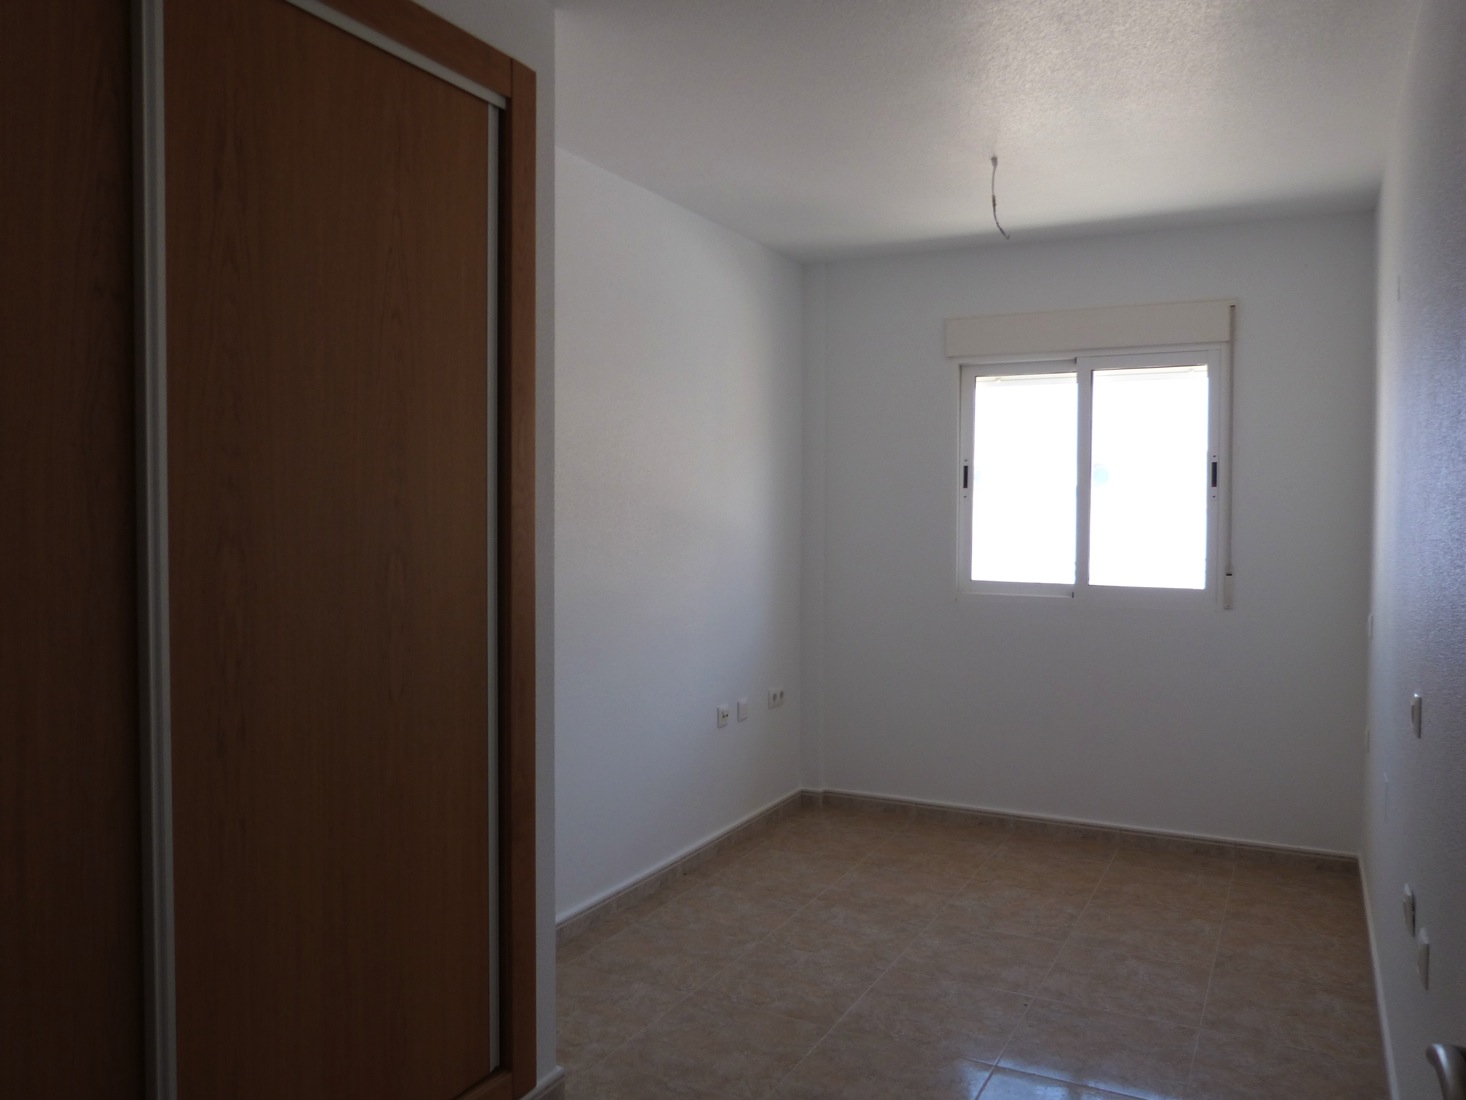 MODERN 2 BED APARTMENT - 300m TO THE BEACH